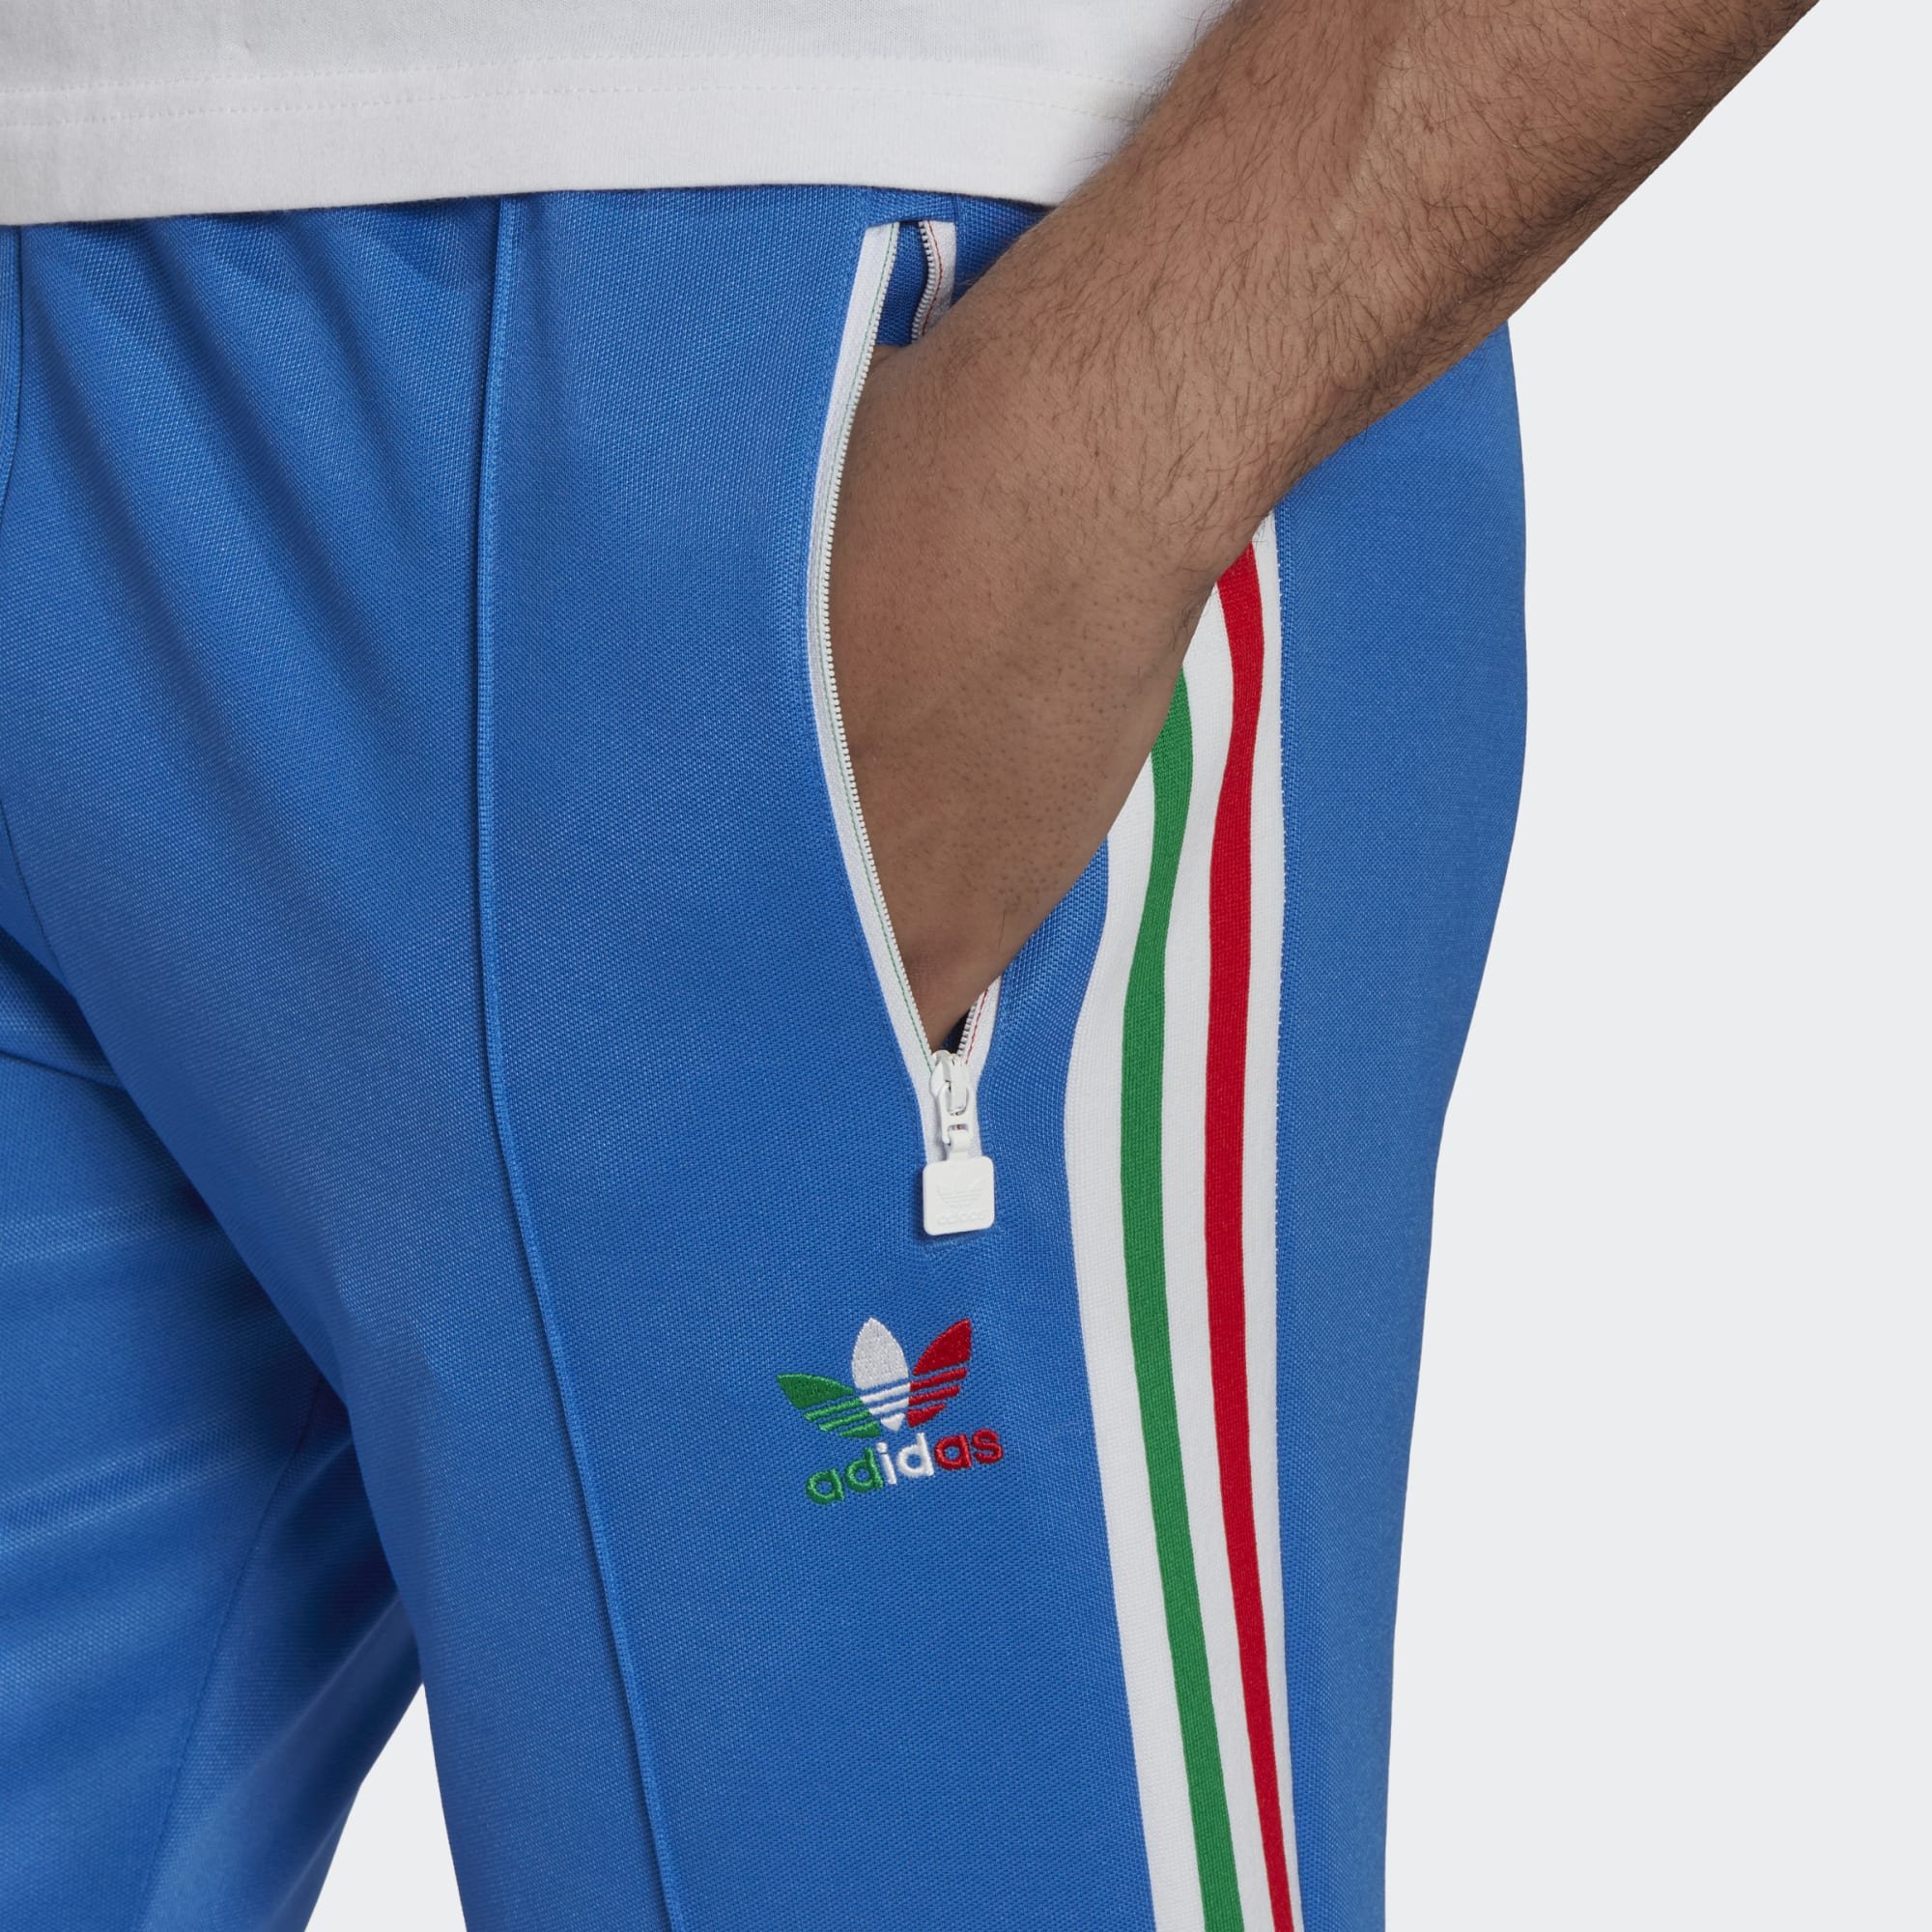 adidas Beckenbauer Track Pant Bright Royal / White / Red / Green